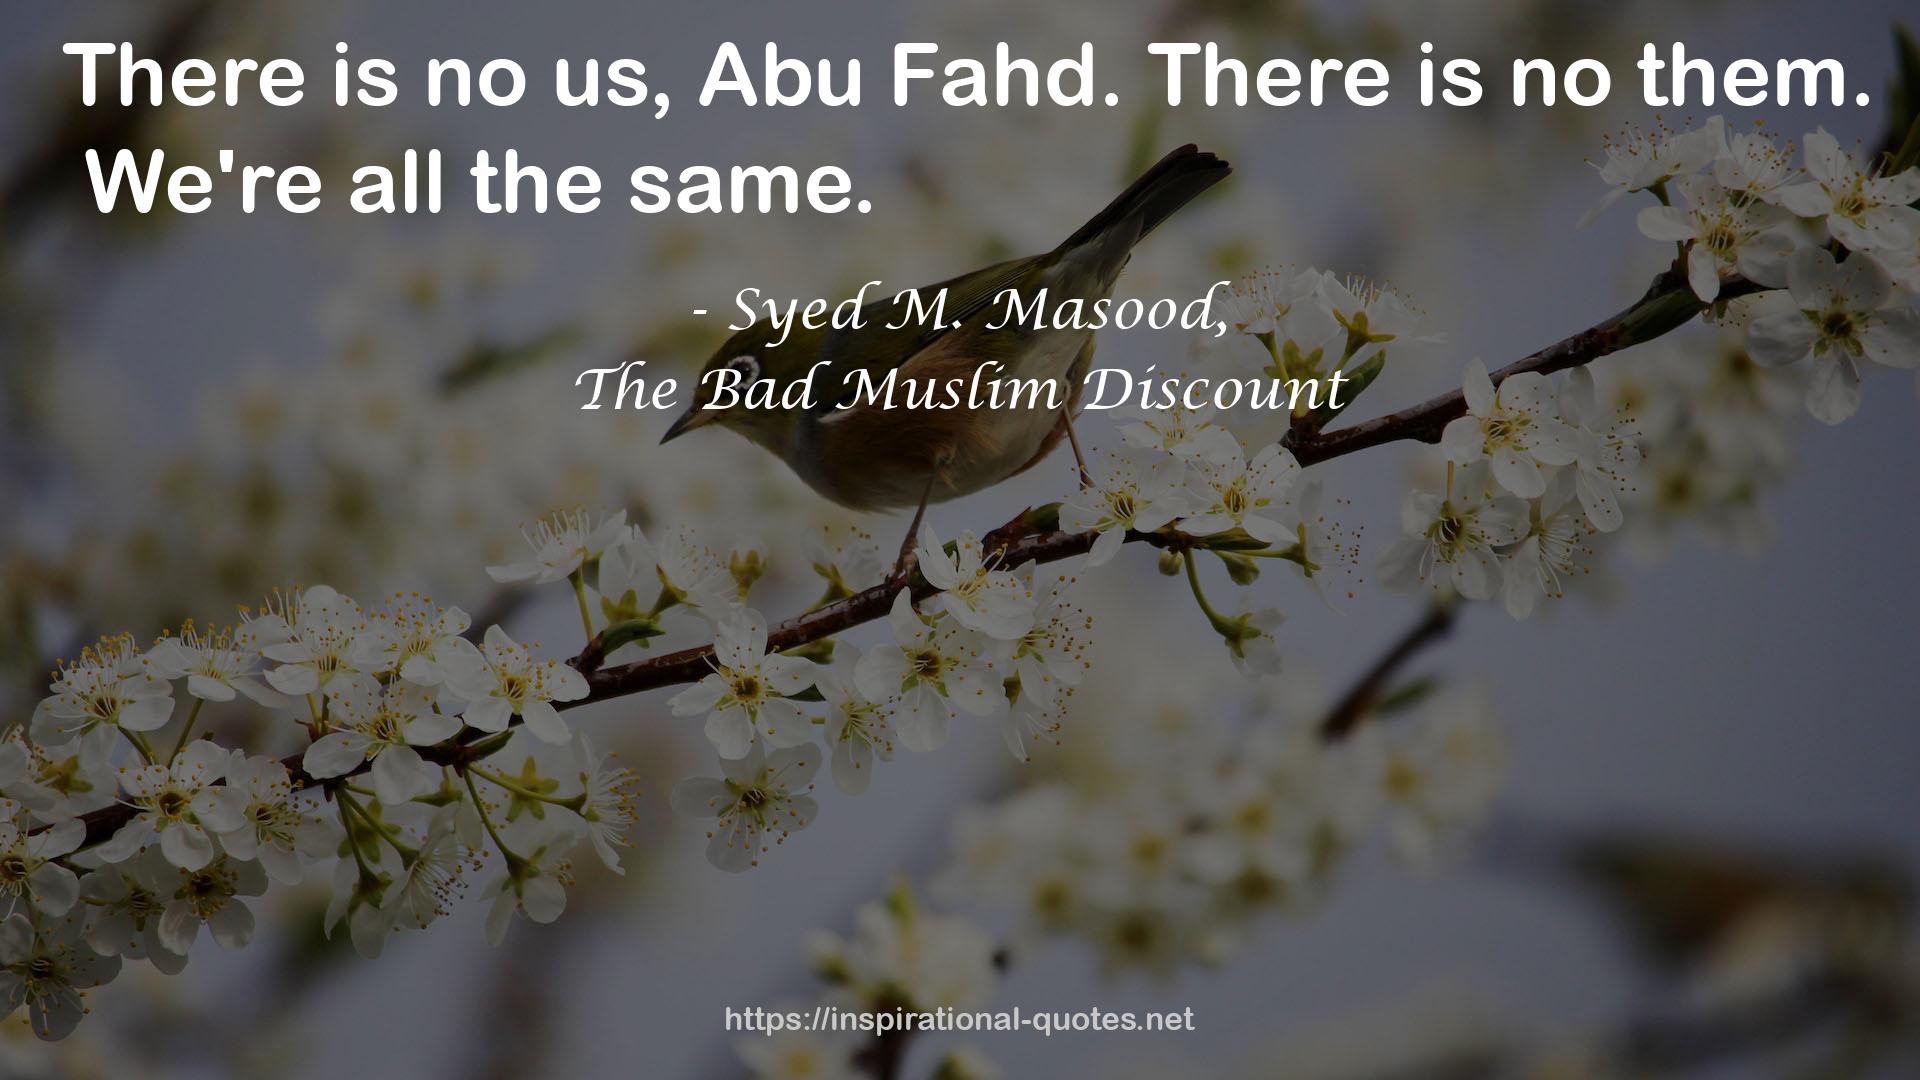 The Bad Muslim Discount QUOTES